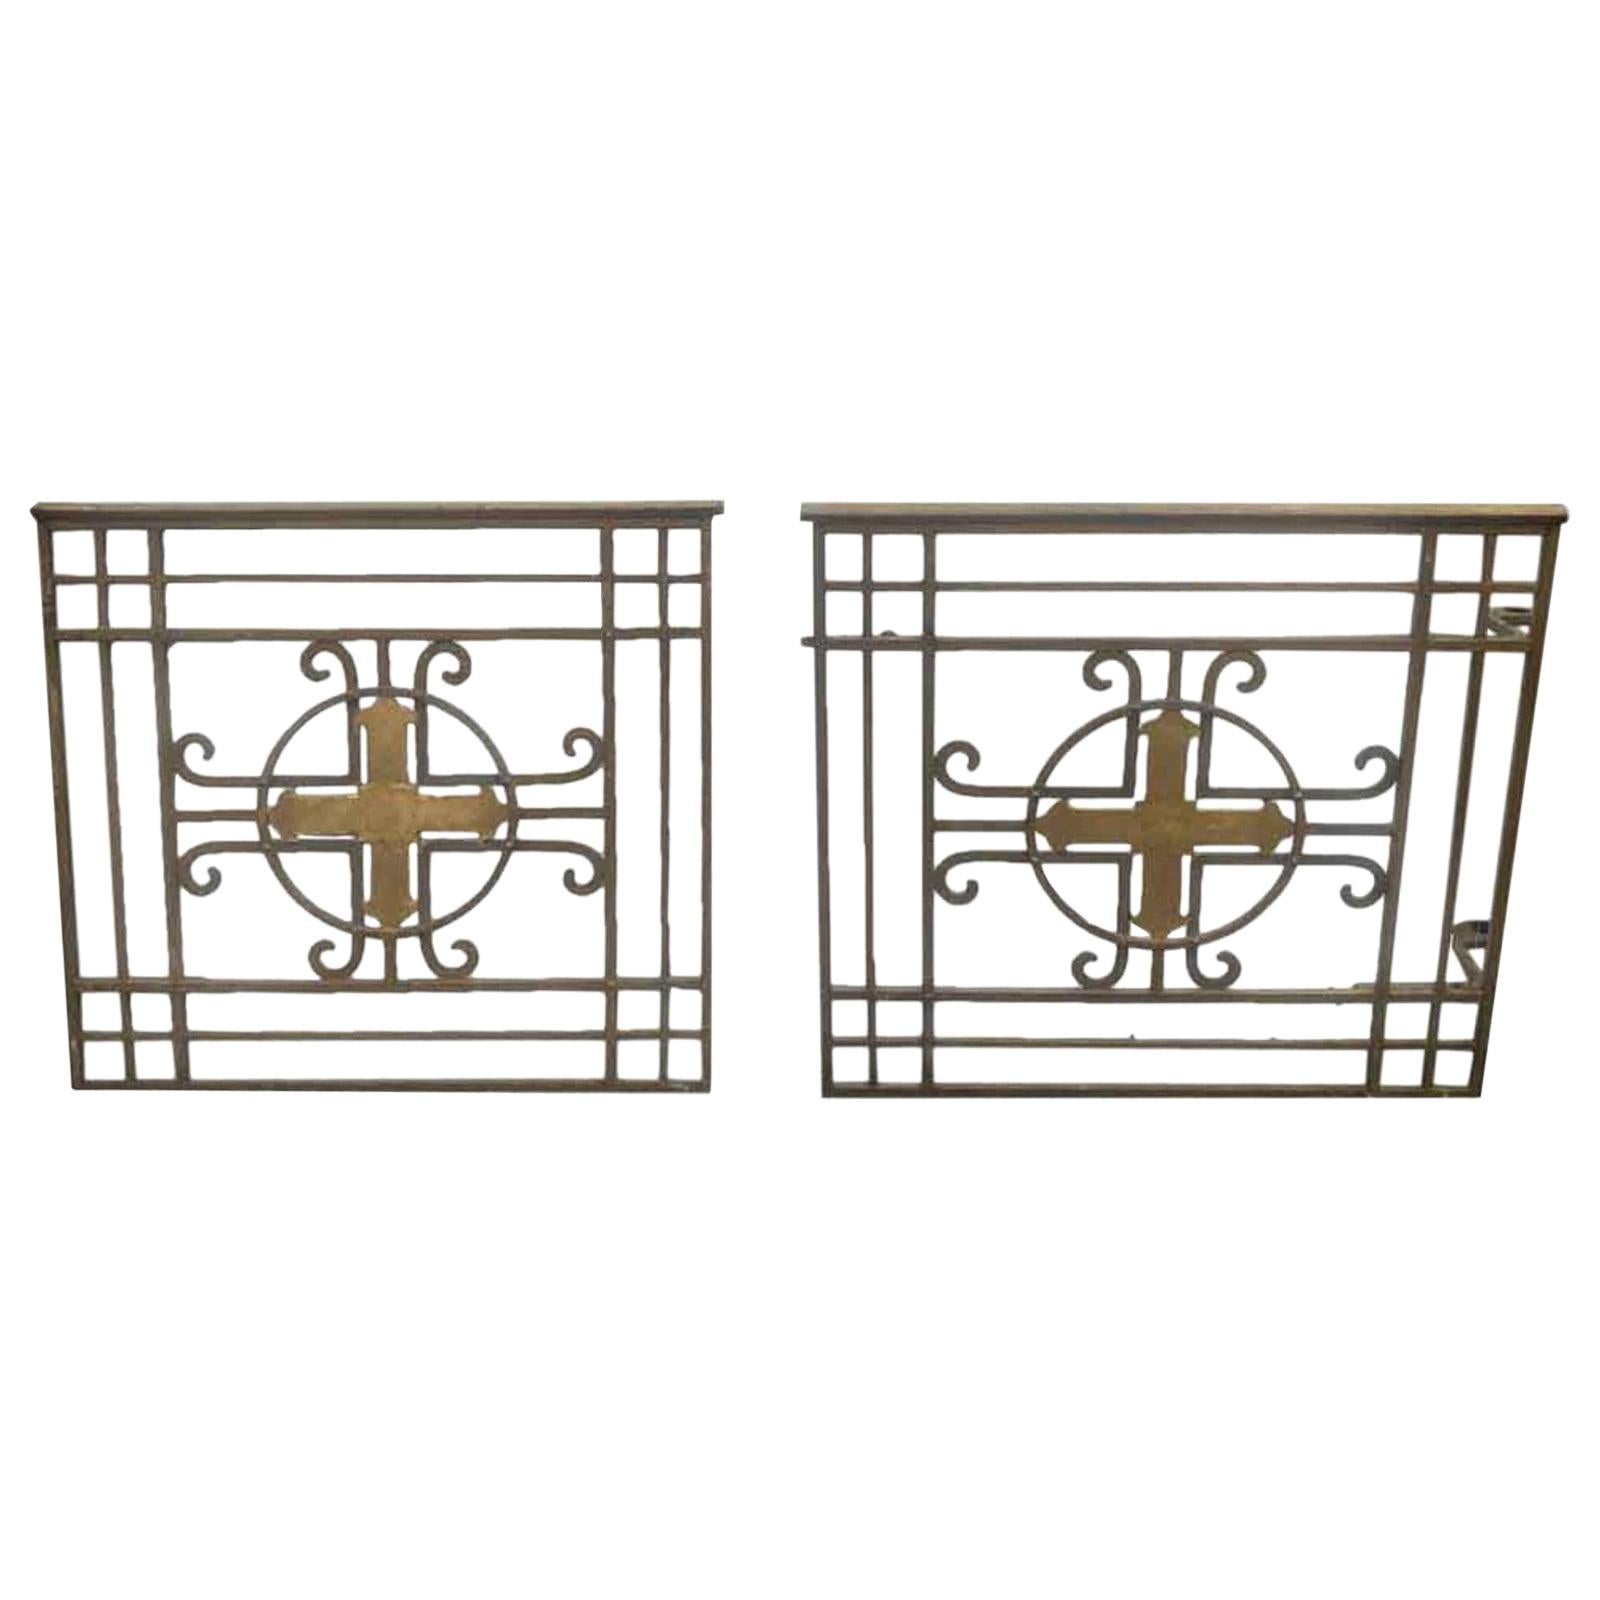 1950s Pair of Antique Steel Altar Gates Done in a Brass and Gold Finish